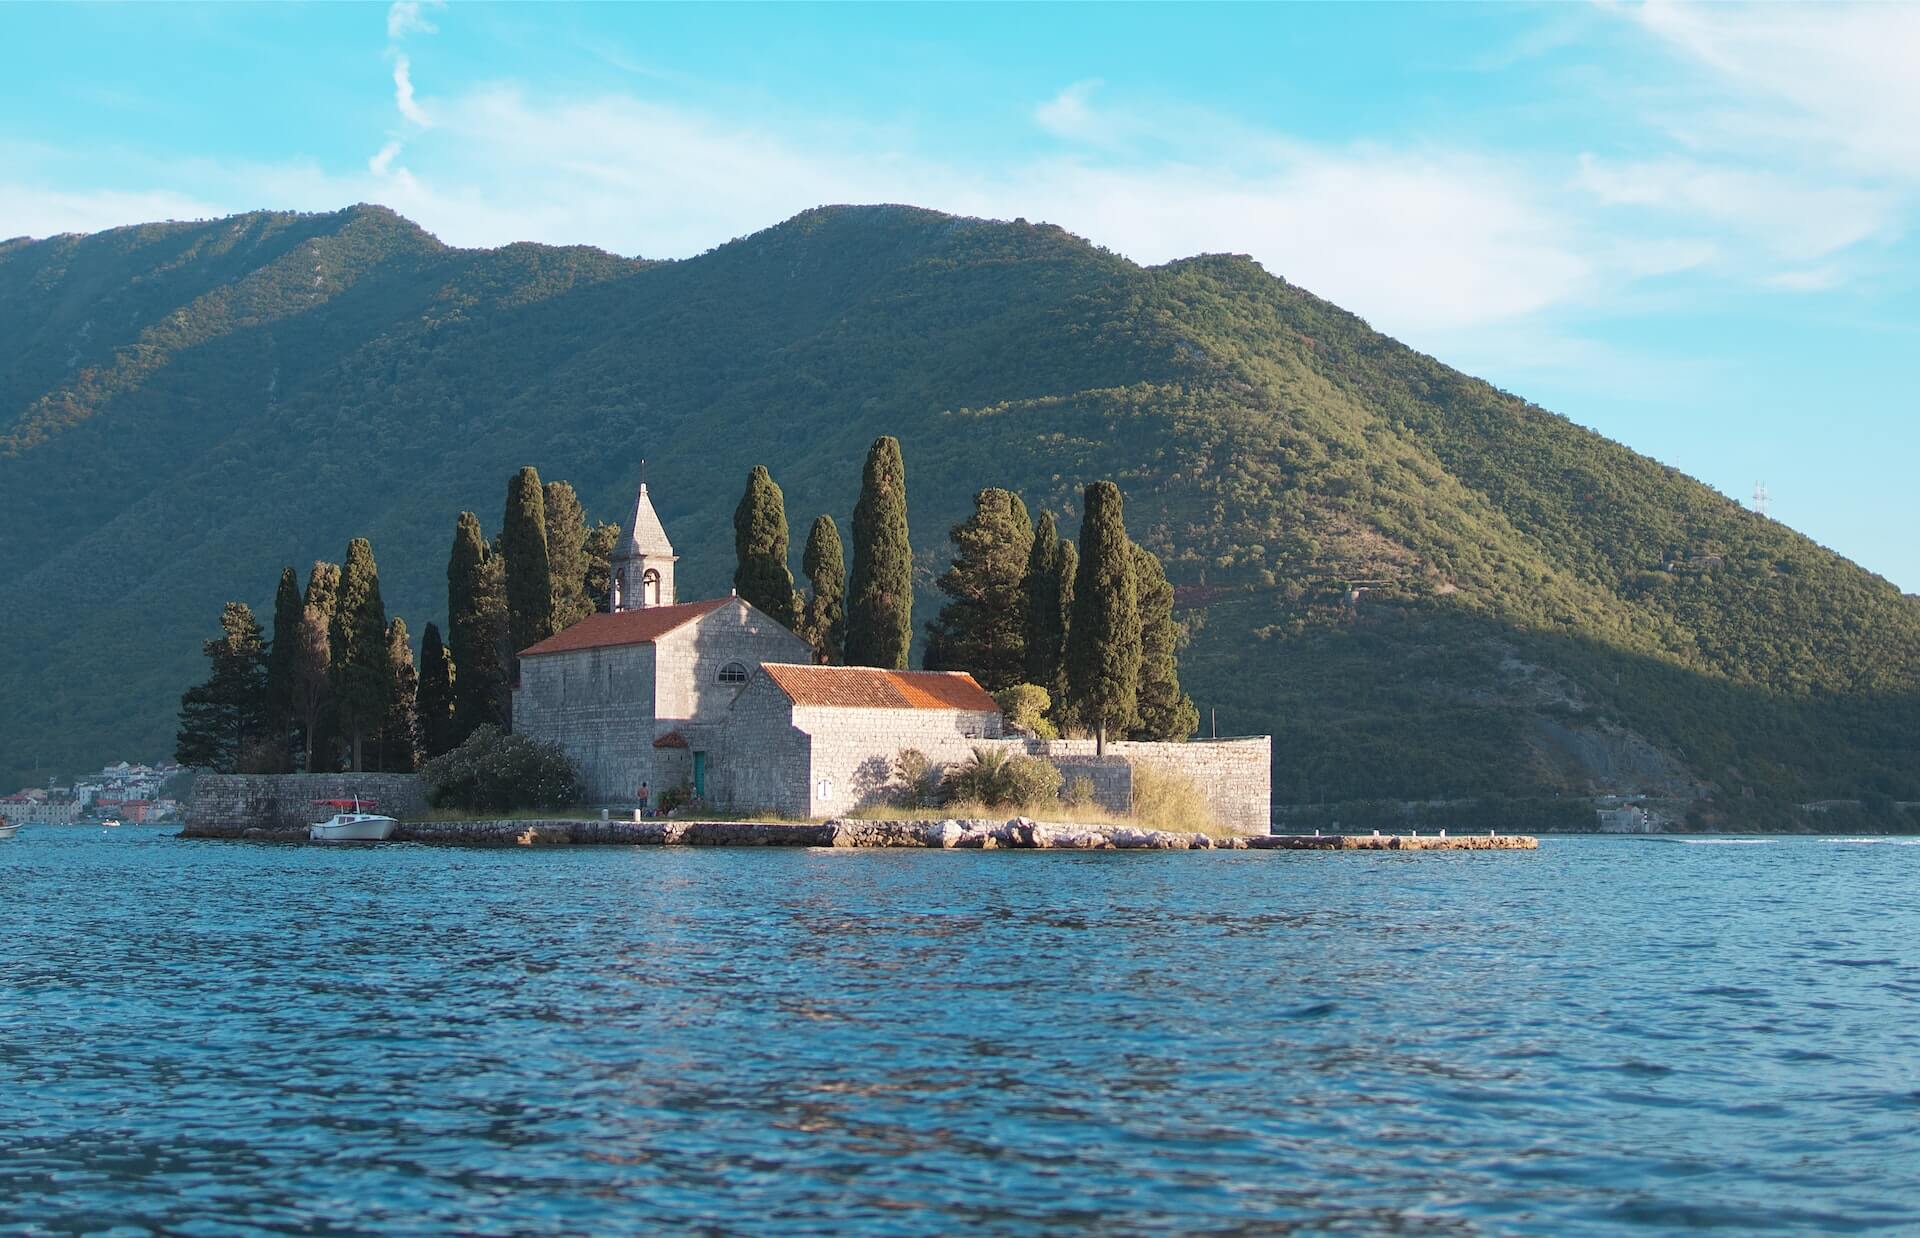 An image of monastery on a small island in Boka Bay Montenegro